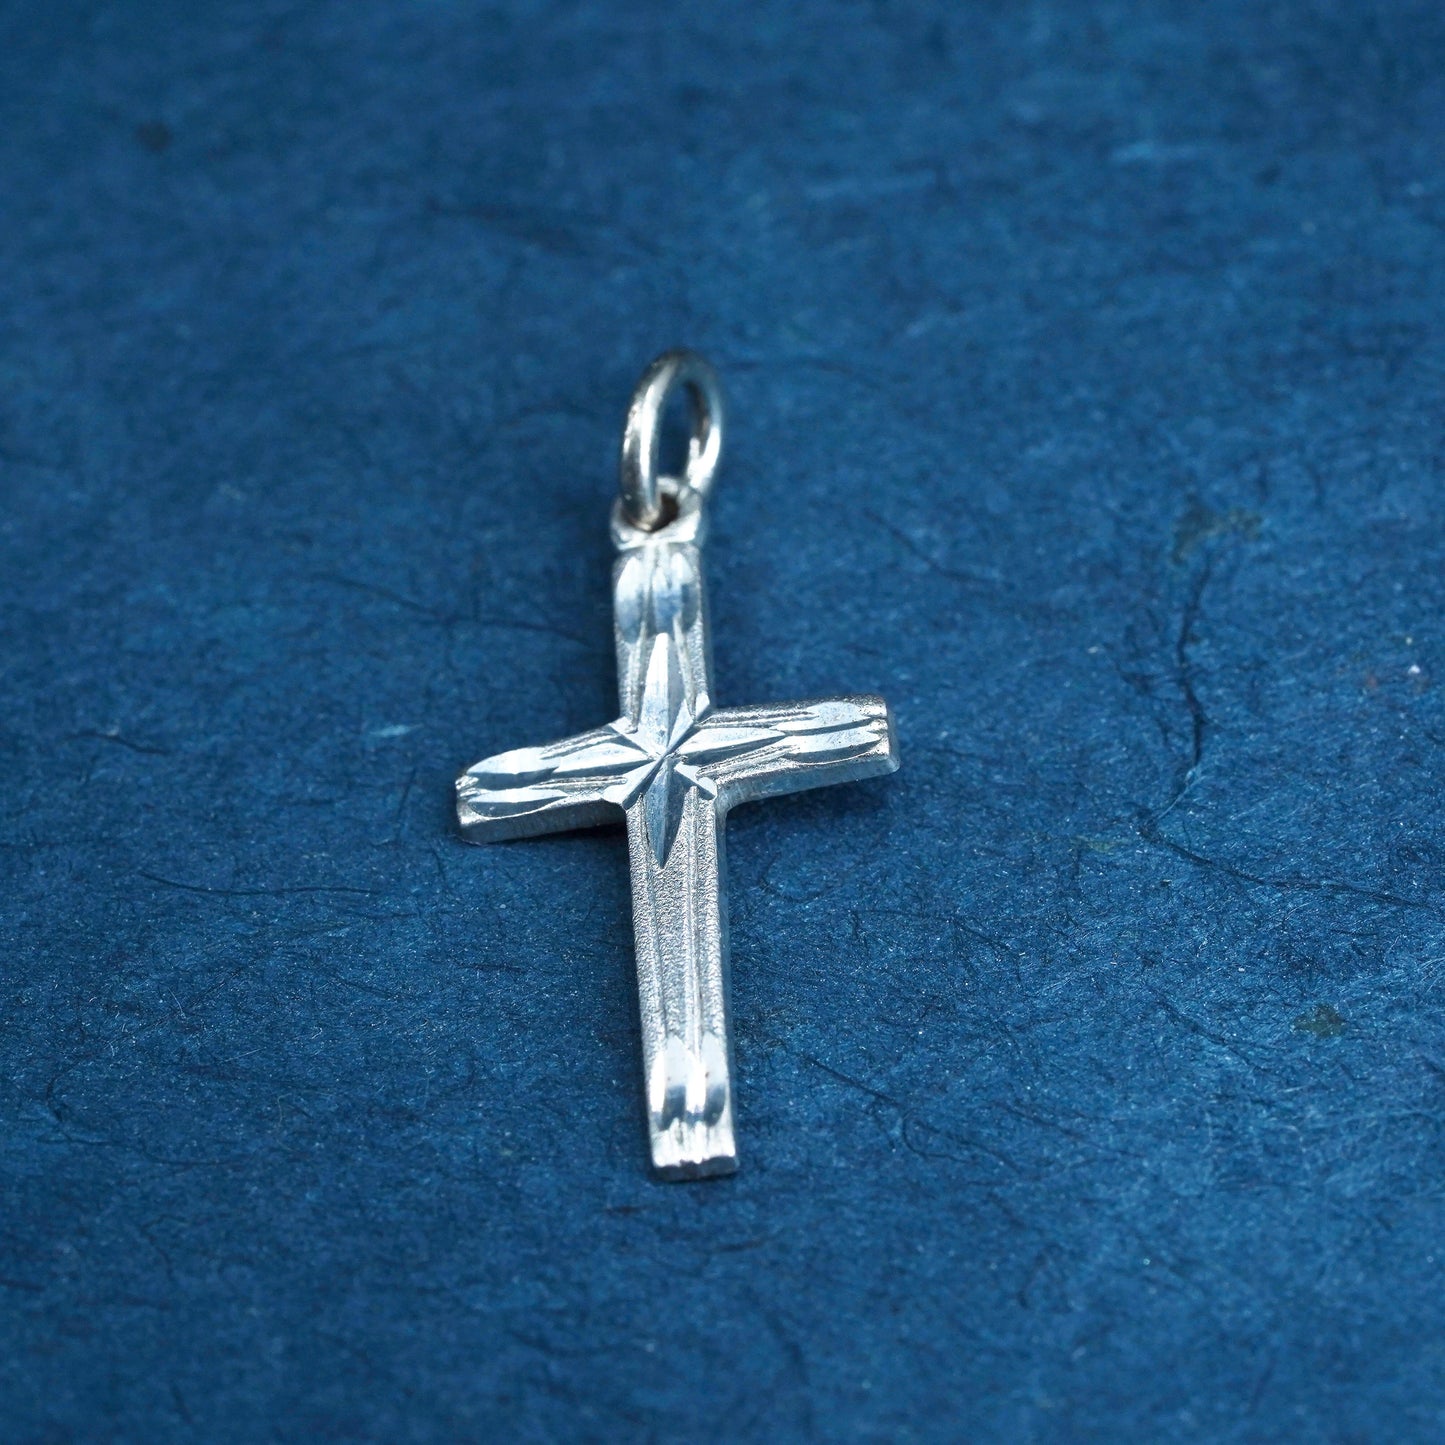 Vintage Sterling silver handmade charm, solid 925 silver cross pendant